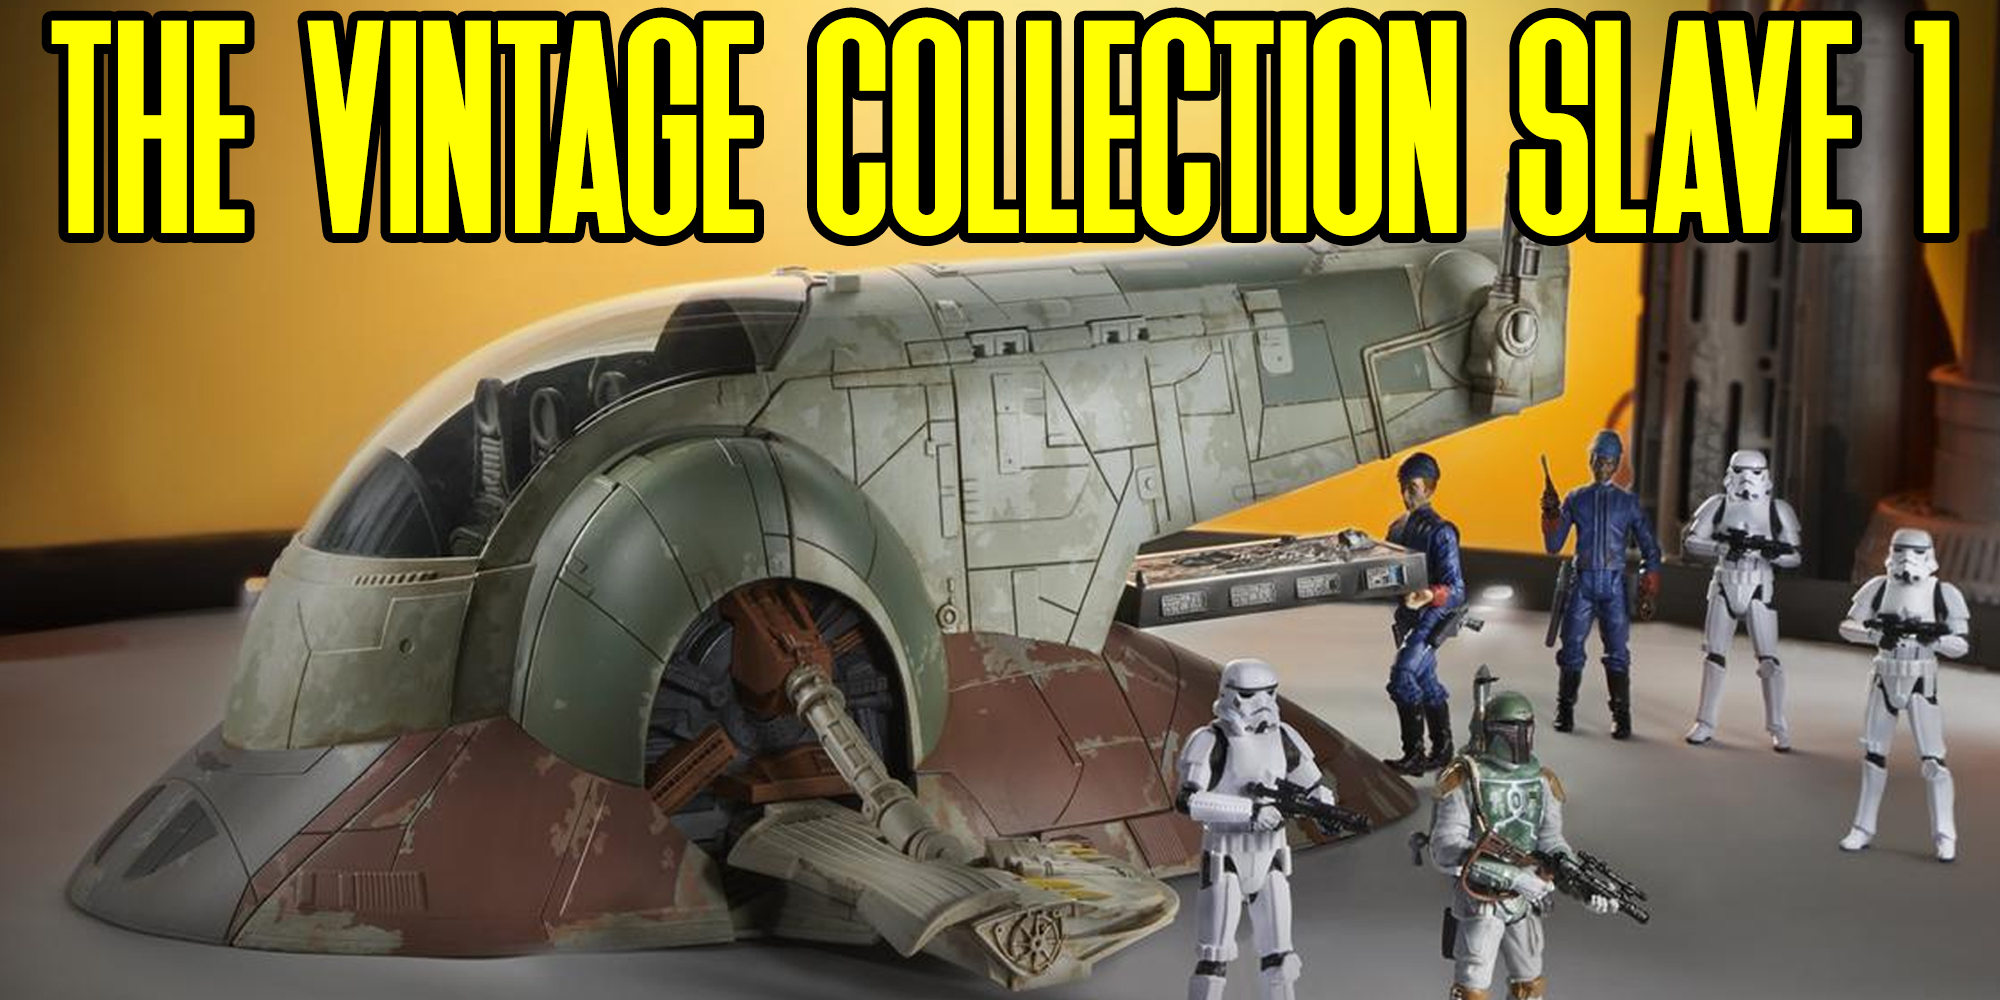 The Vintage Collection Slave 1